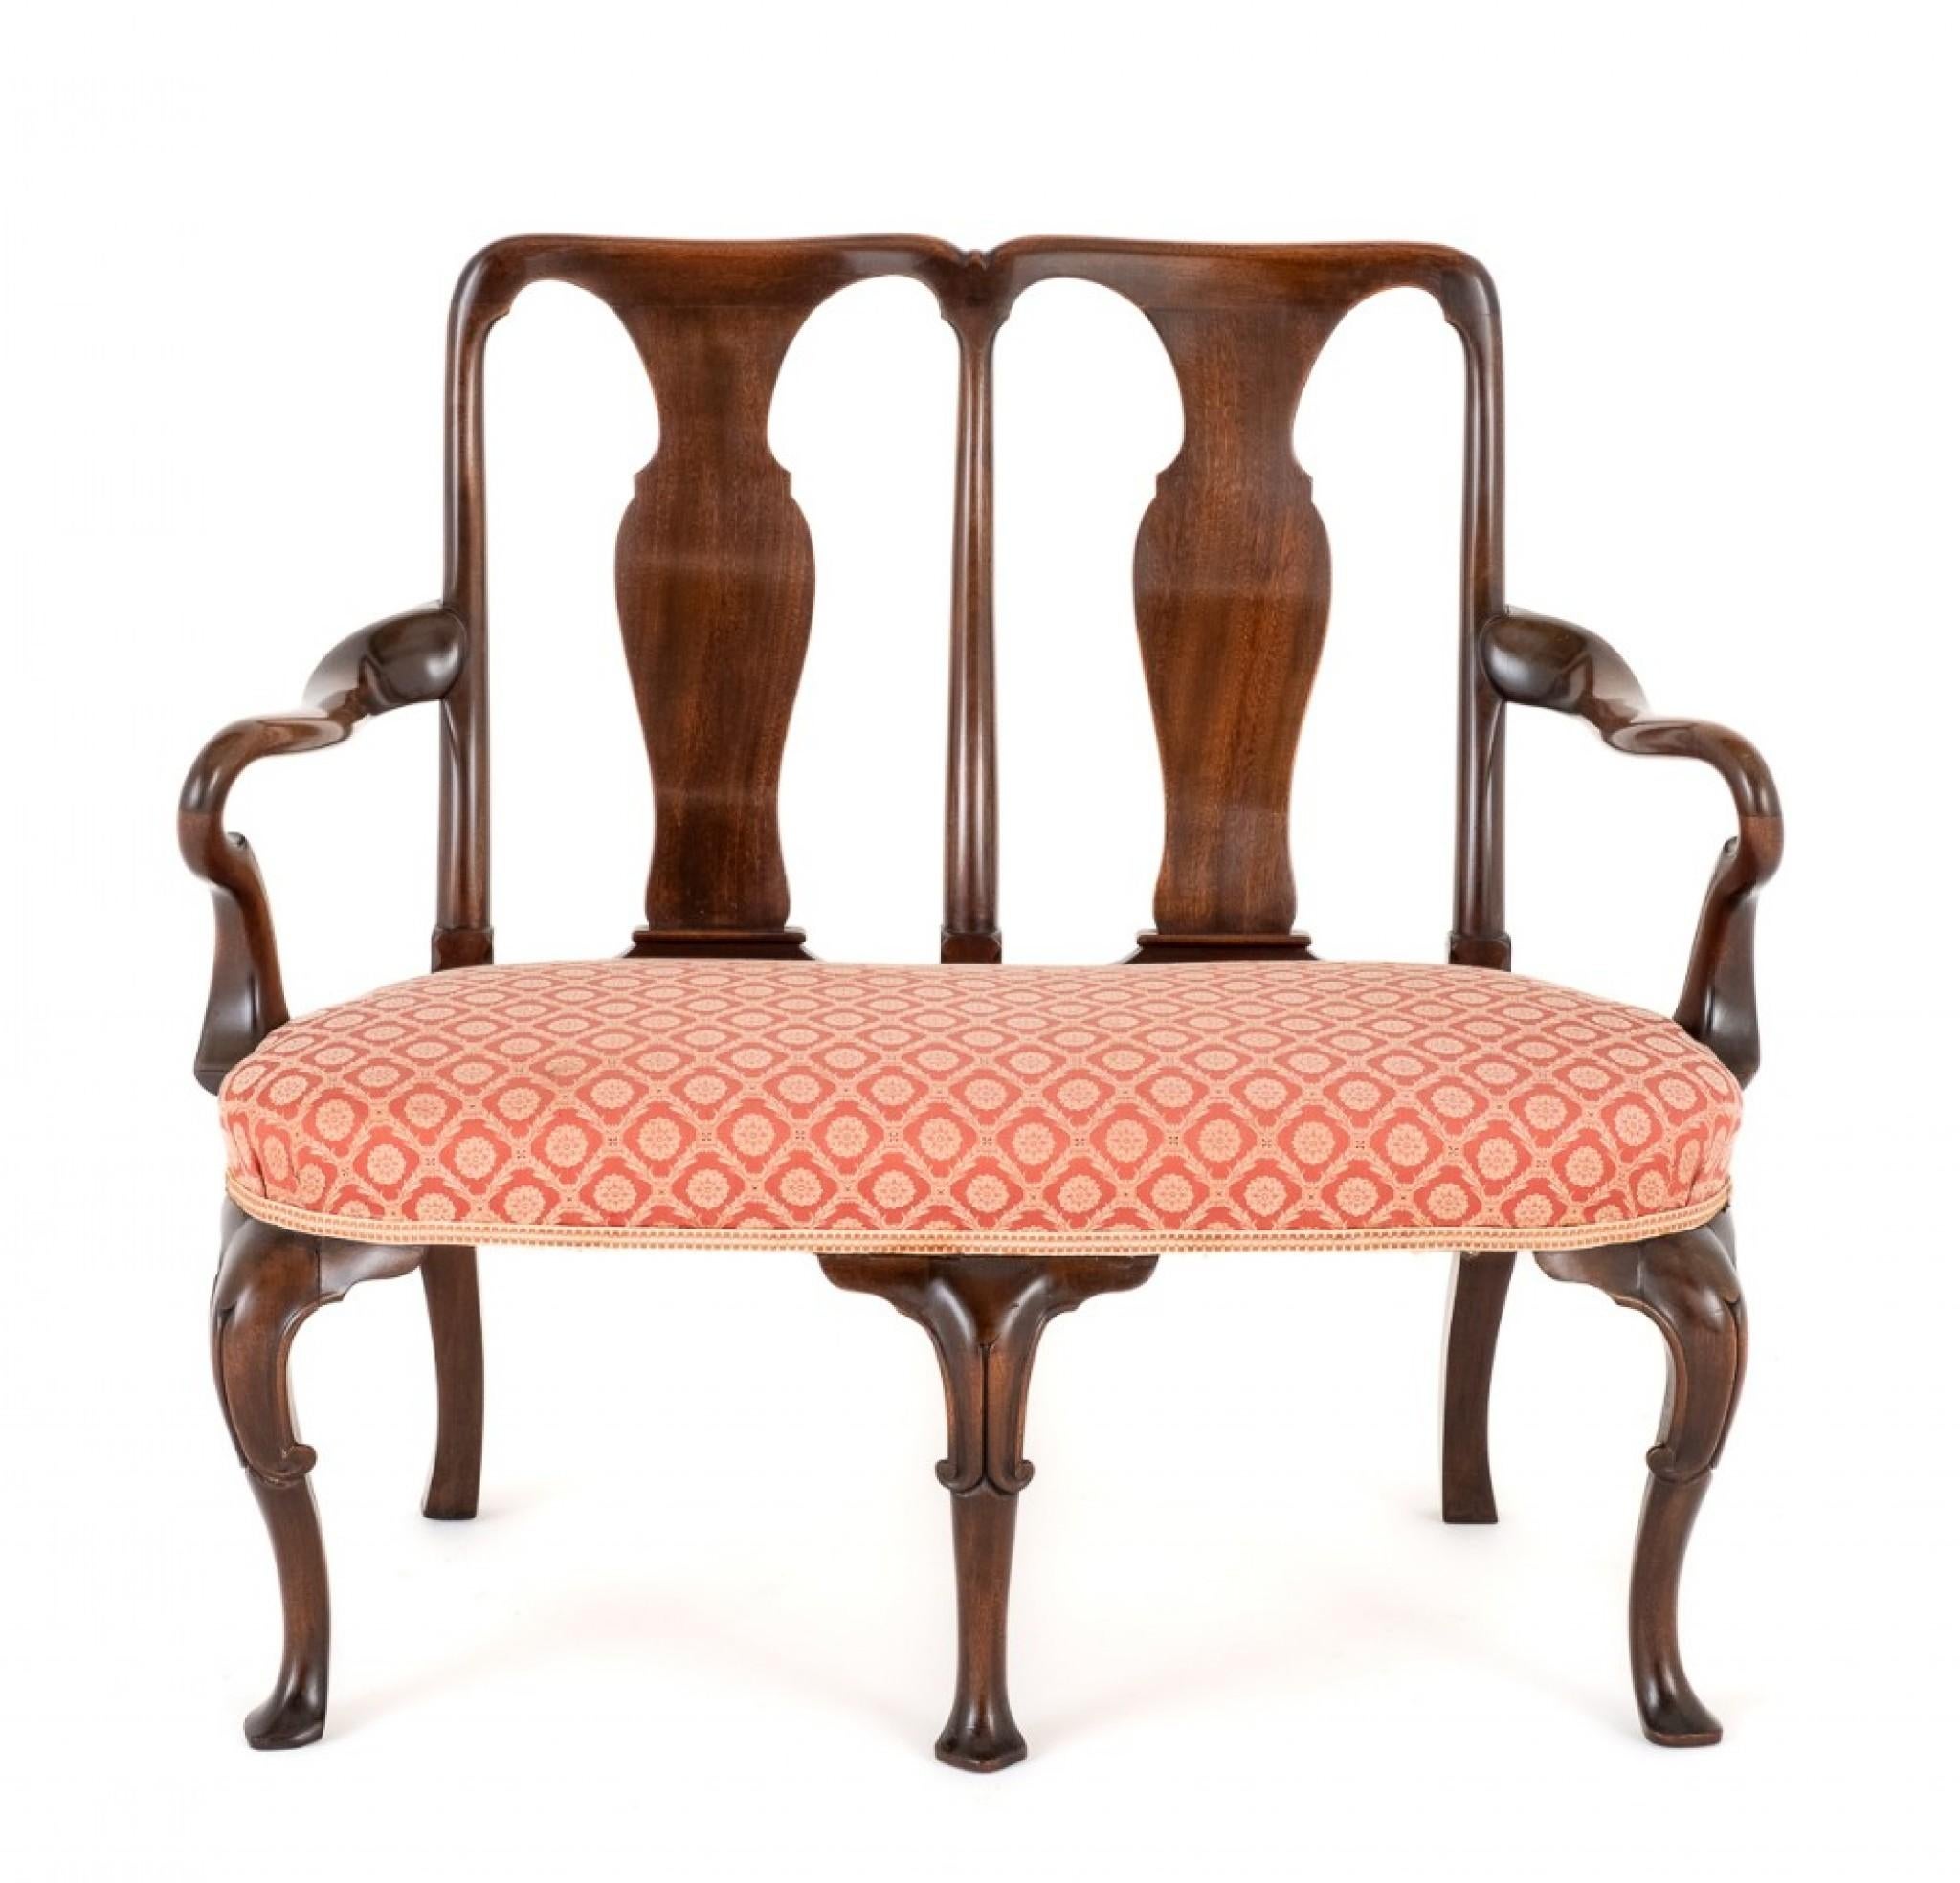 Late 19th Century Queen Anne Double armchair Settee Mahogany, 1880